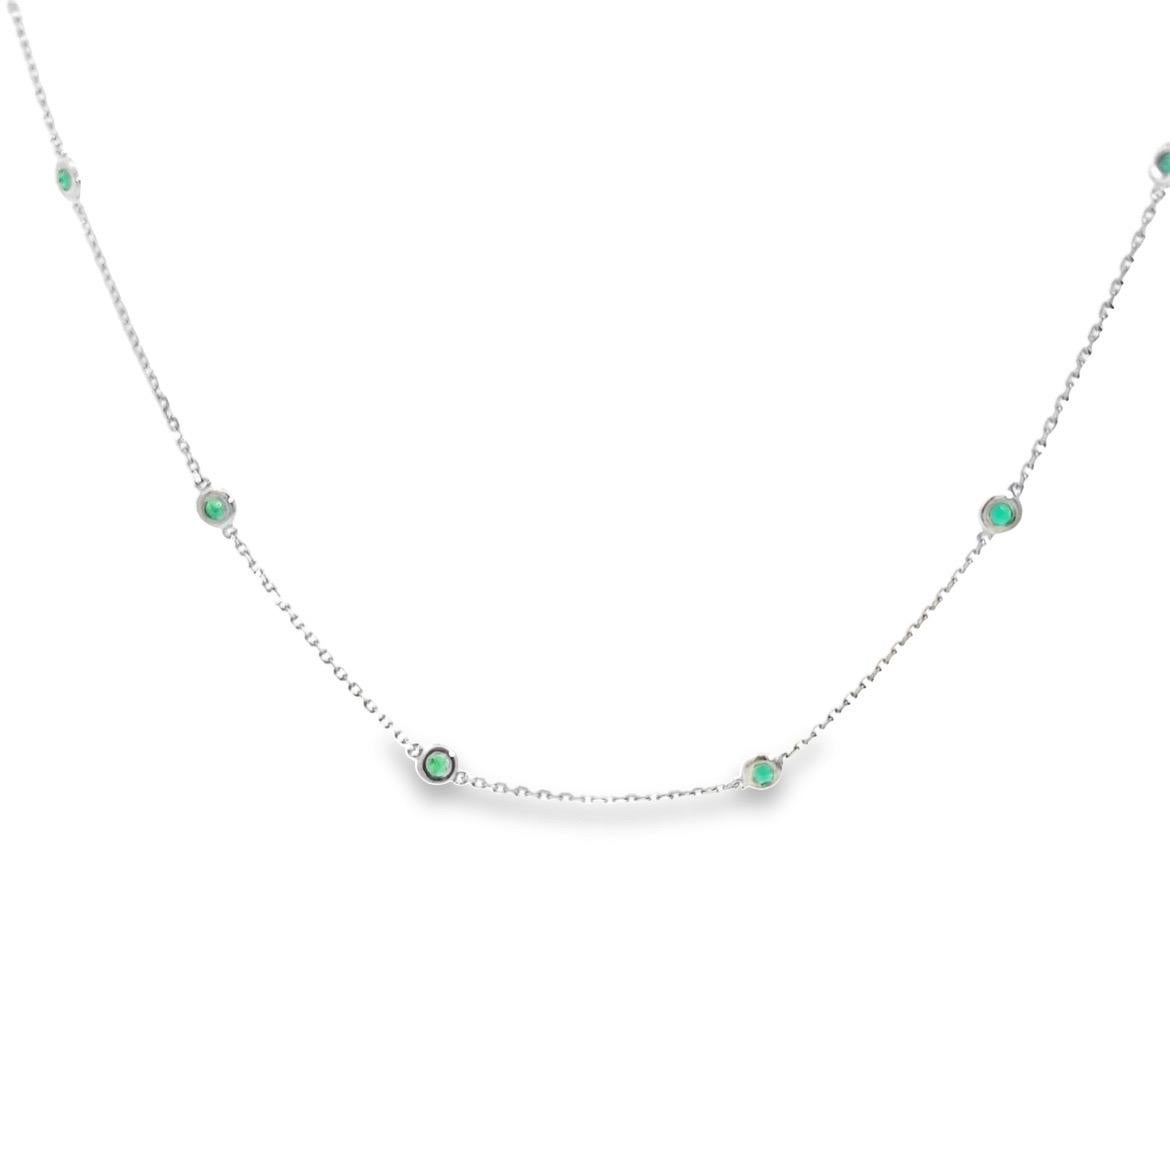 Diamonds by The Yard Chain Necklace in 14k White with Natural Emerald Gem-stones
Natural Round Brilliant Full Cut  Emeralds
14k White Gold
19 Natural Green Emeralds
1.20 Total Carat Weight
24 inches
MADE IN USA